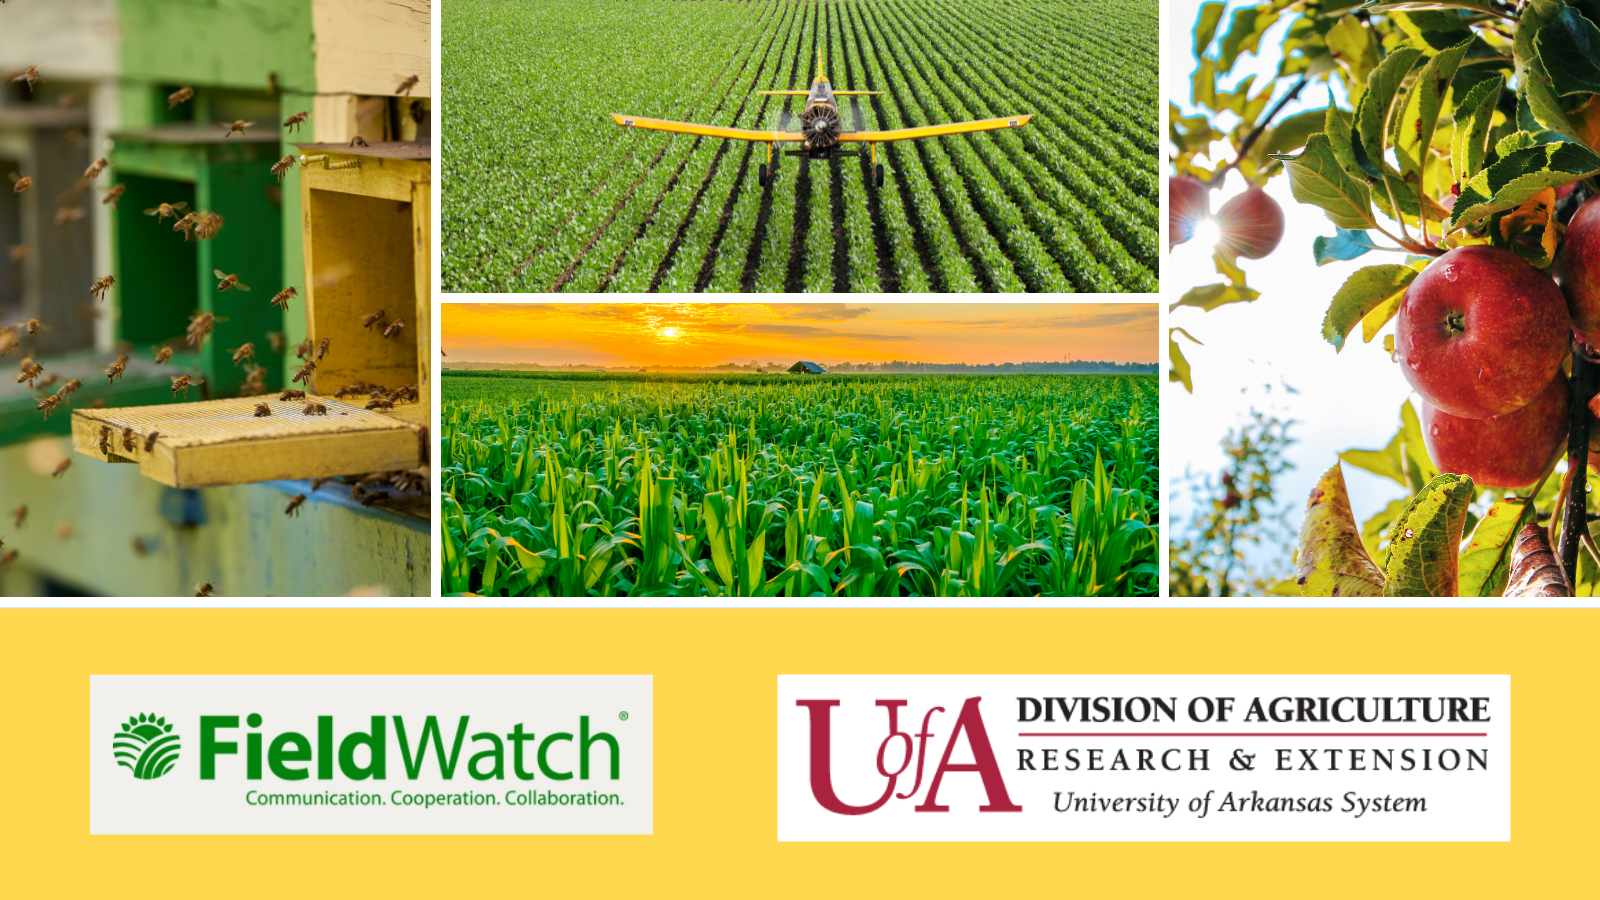 Graphic for FieldWatch in partnership with the University of Arkansas System Division of Agriculture | logos at the bottom | photos include top left, honeybees swarming into a beehive | middle, yellow crop duster spraying a soybean field | middle, a corn field at sunset | right, a close up of apples hanging in a tree